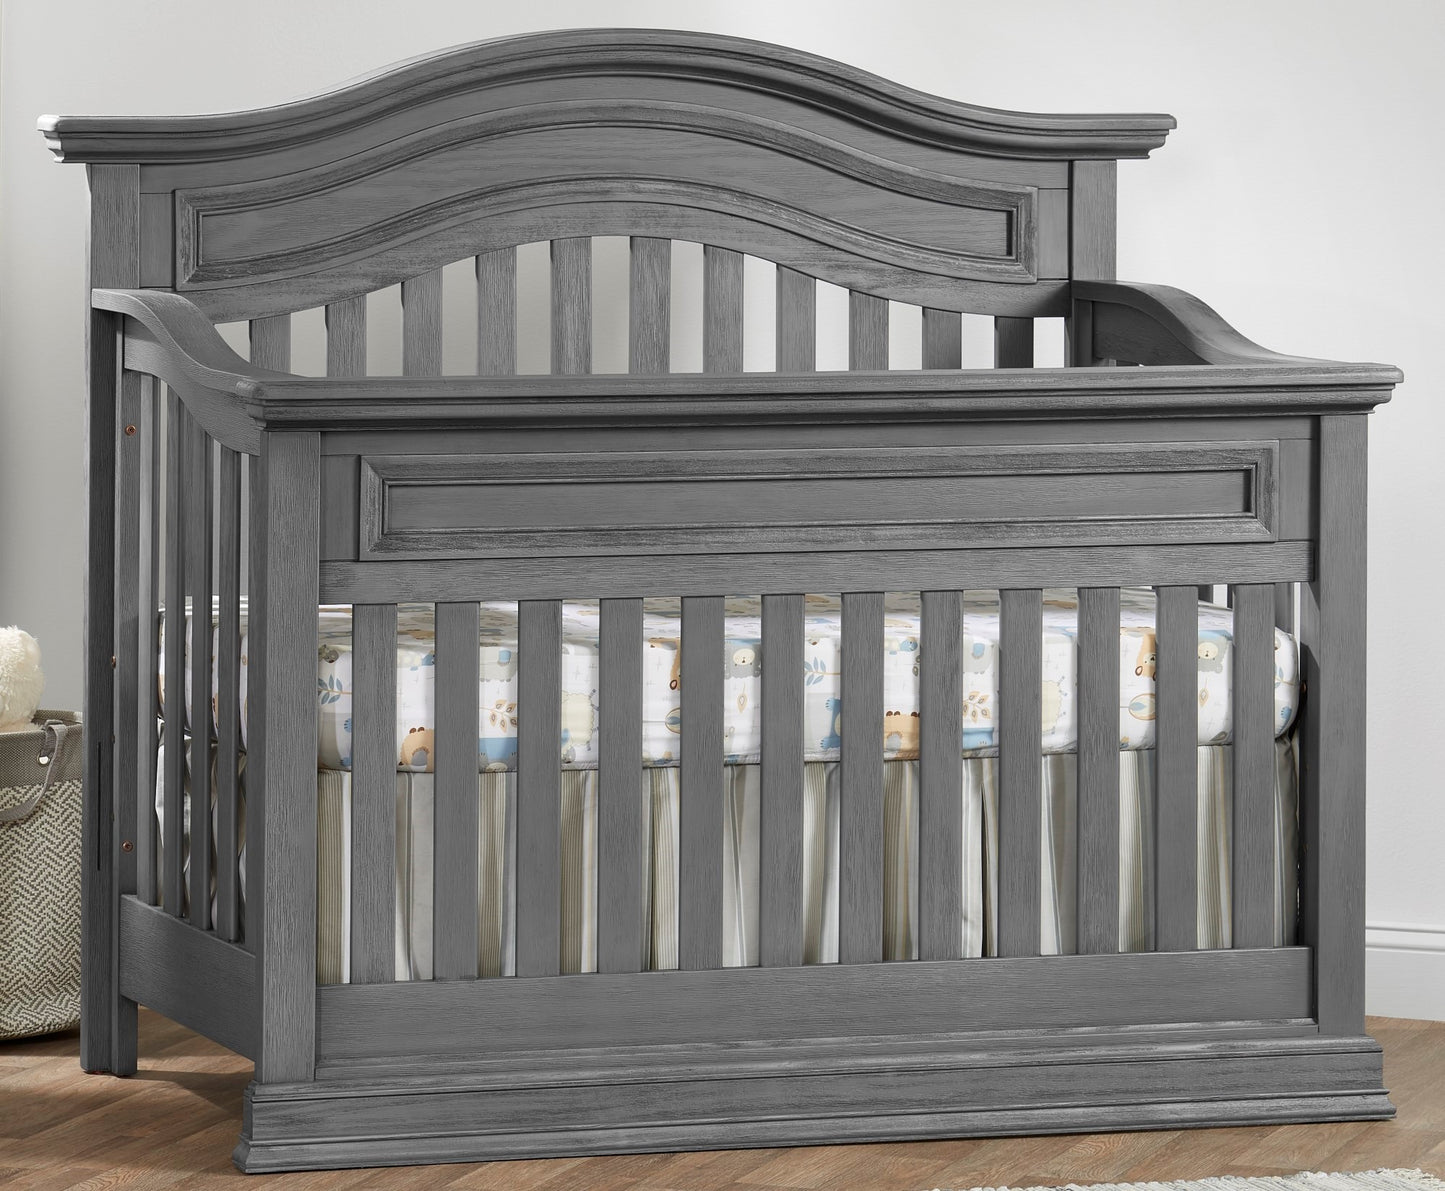 4 IN 1 GLENBROOK COLLECTION CONVERTIBLE CRIB